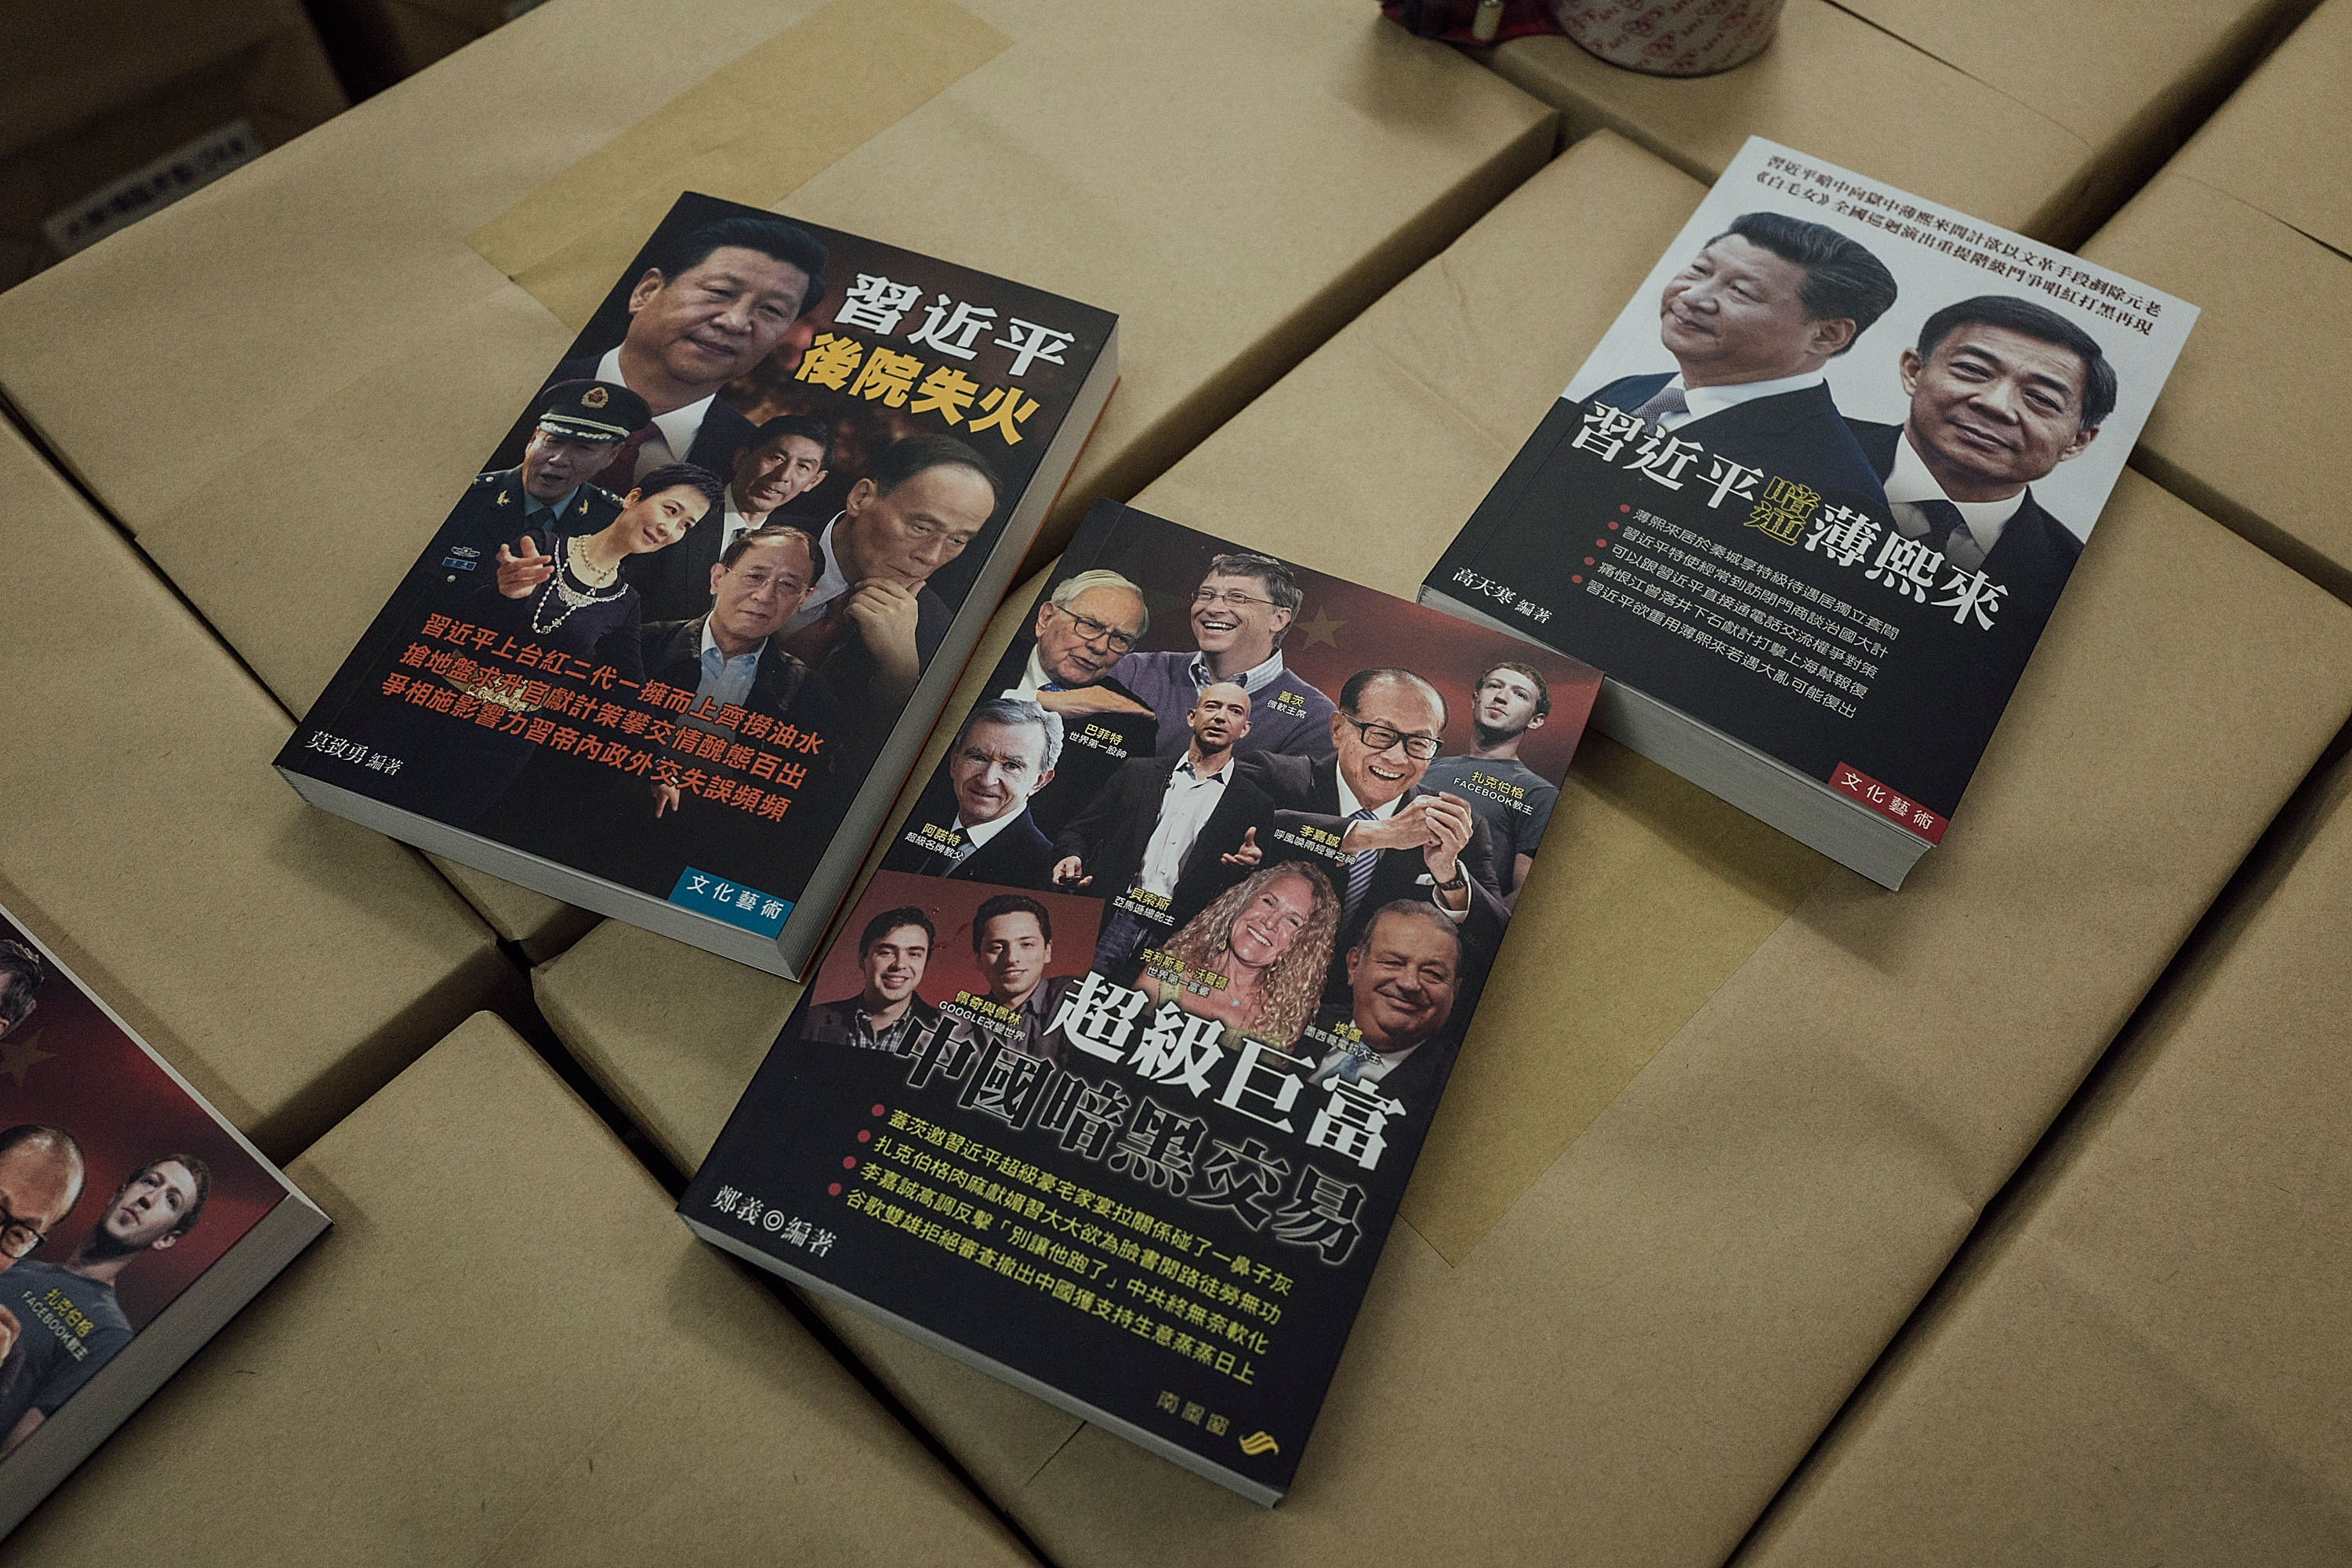 Books on Chinese politics are seen at the warehouse of Hong Kong–based publisher Mighty Current Media, owned by missing bookseller Lee Bo, on Jan. 2, 2016, in Hong Kong (Anthony Kwan—Getty Images)